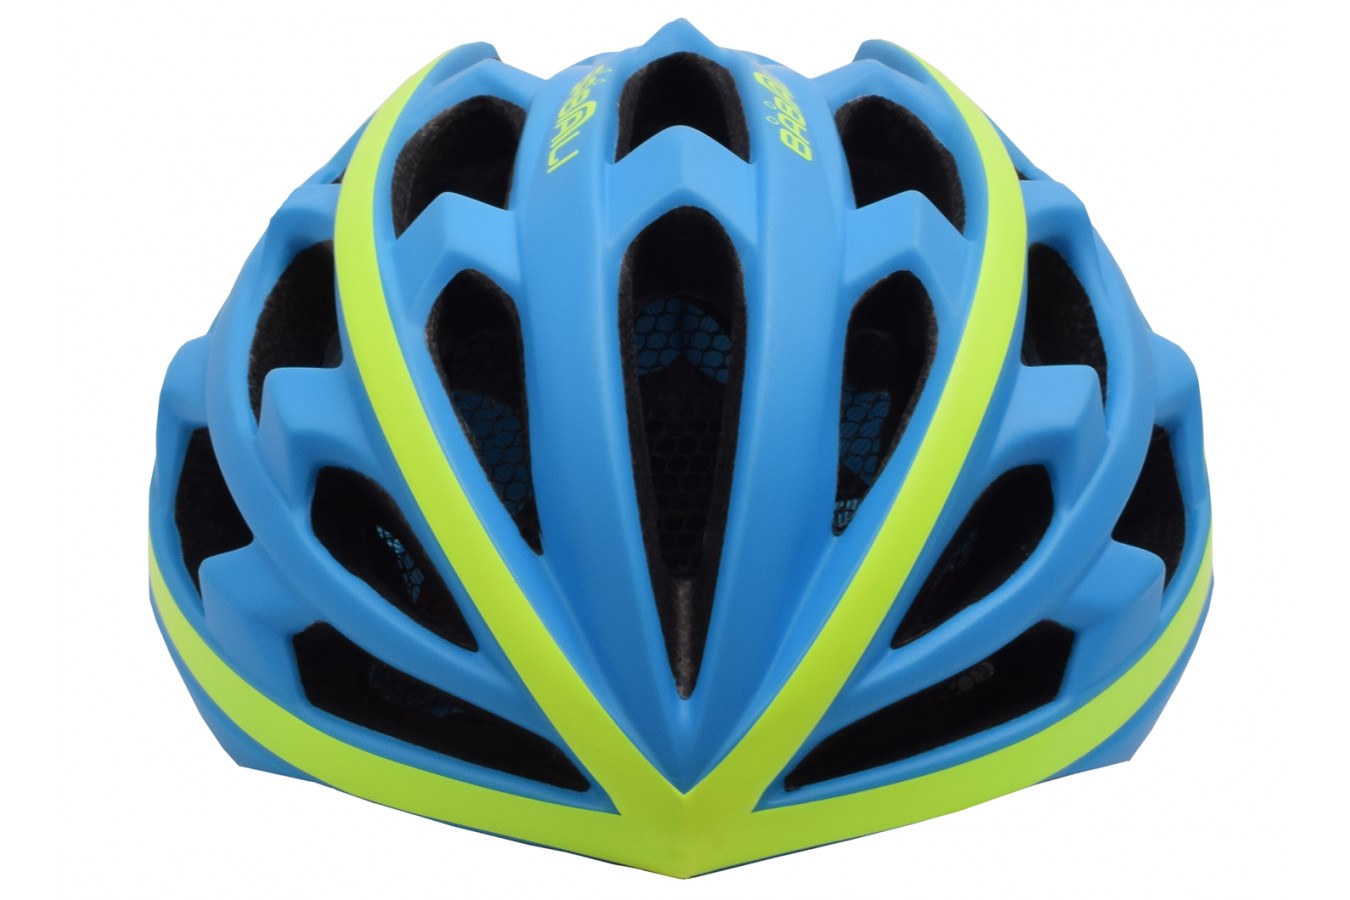 Capacete Ciclista Bluetooth - Babali